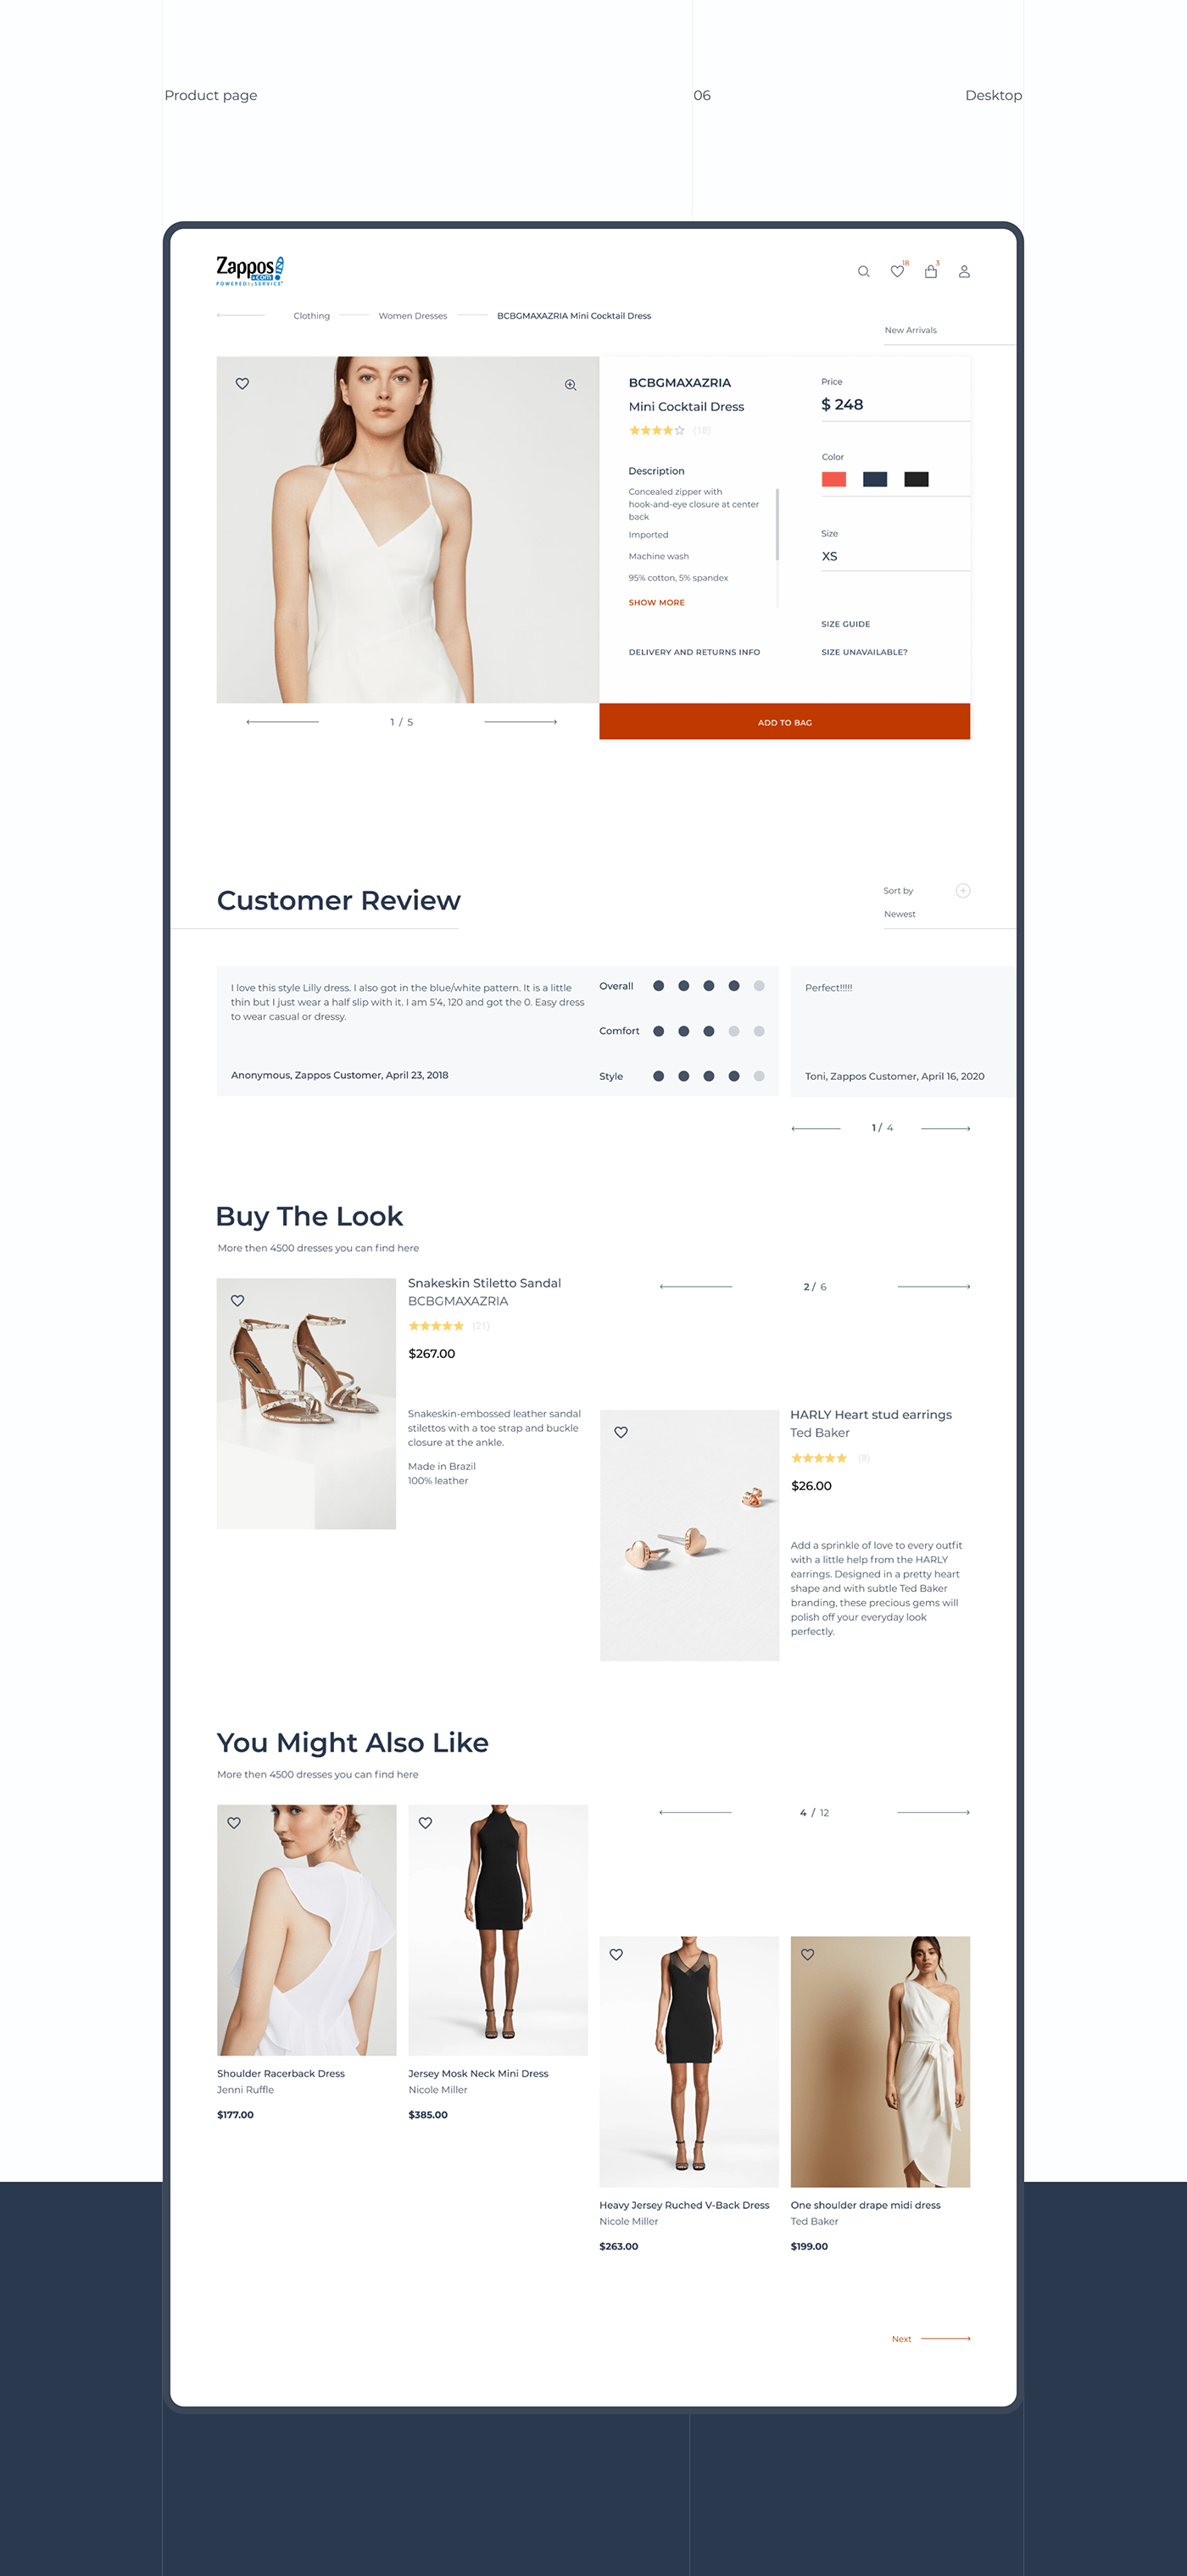 design redesign concept UI Ecommerce Shopping store Fashion  mobile ux Web